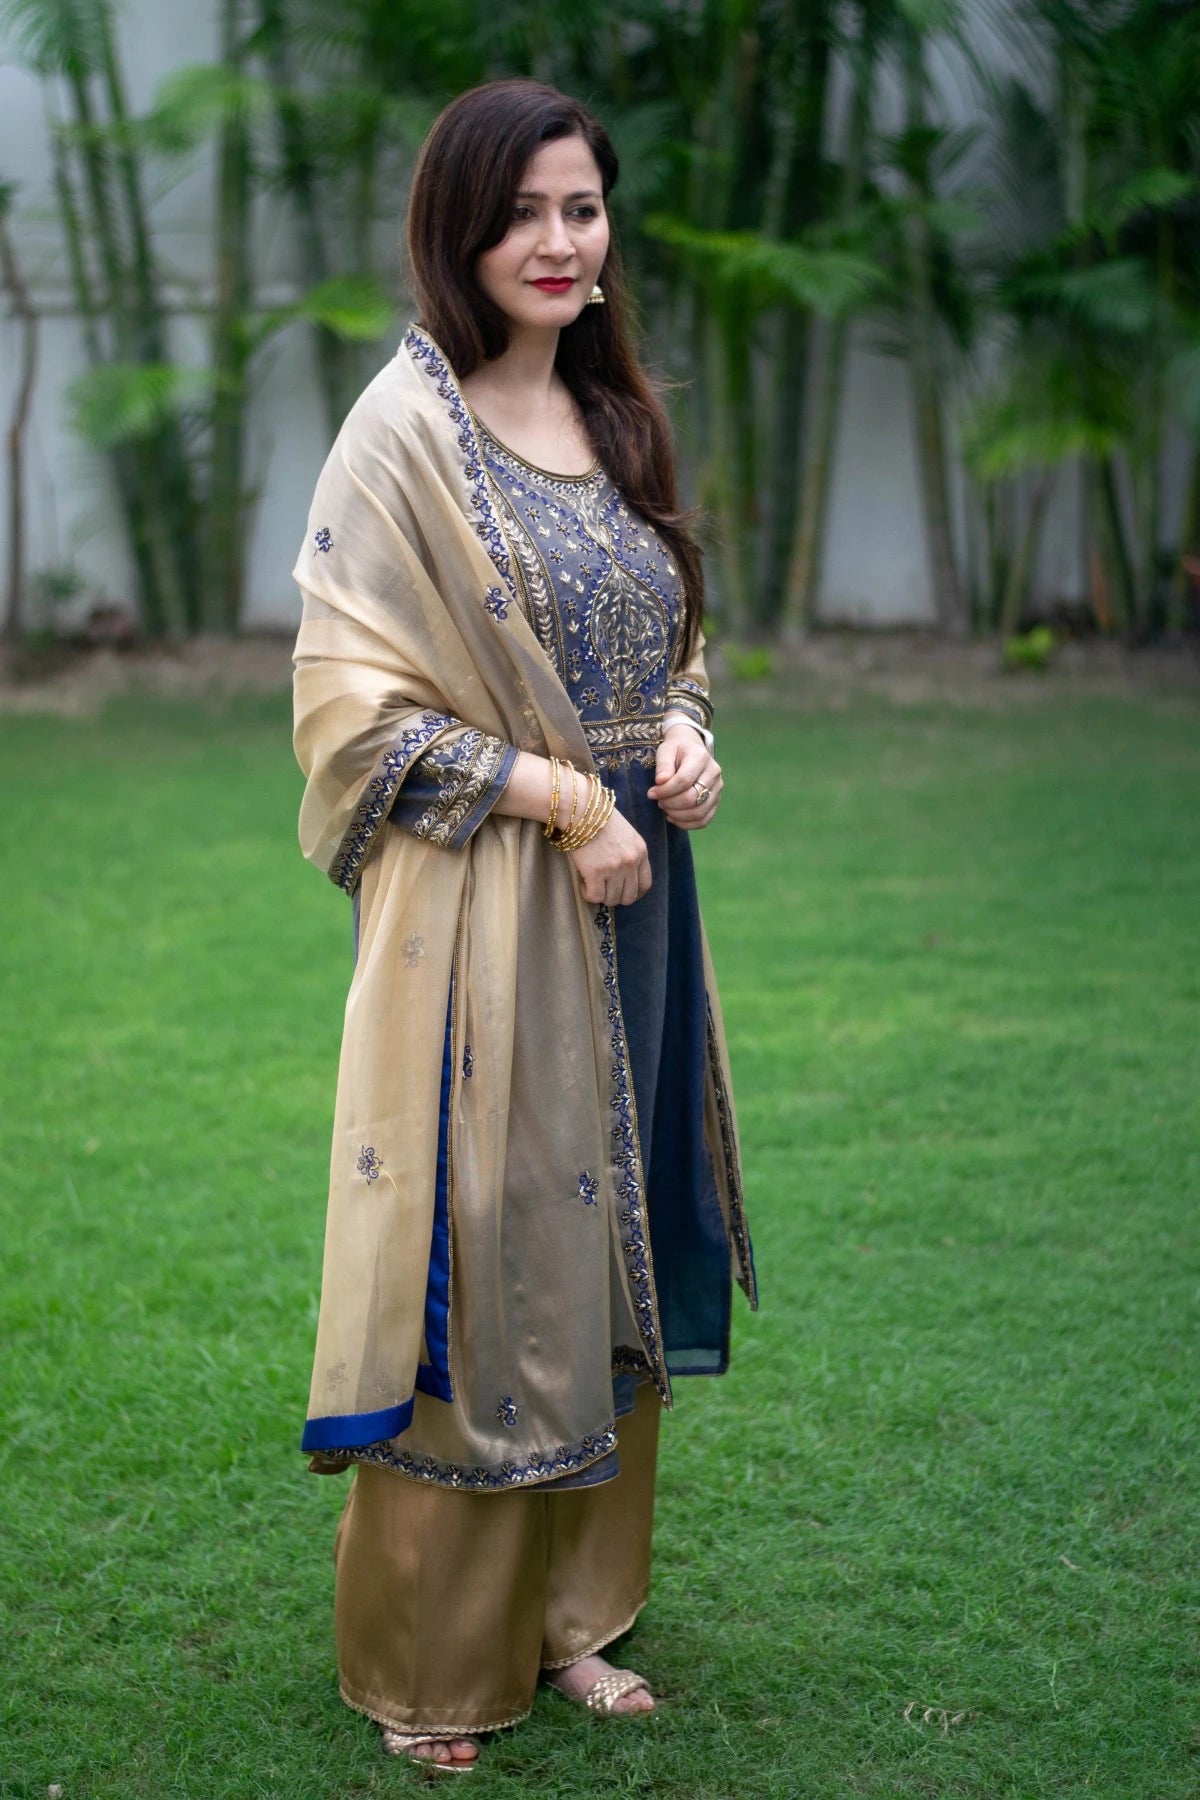 A stunning blue kurta with intricate gold embroidery paired with a matching golden tissue dupatta and palazzo pants, creating a stunning look for a woman.